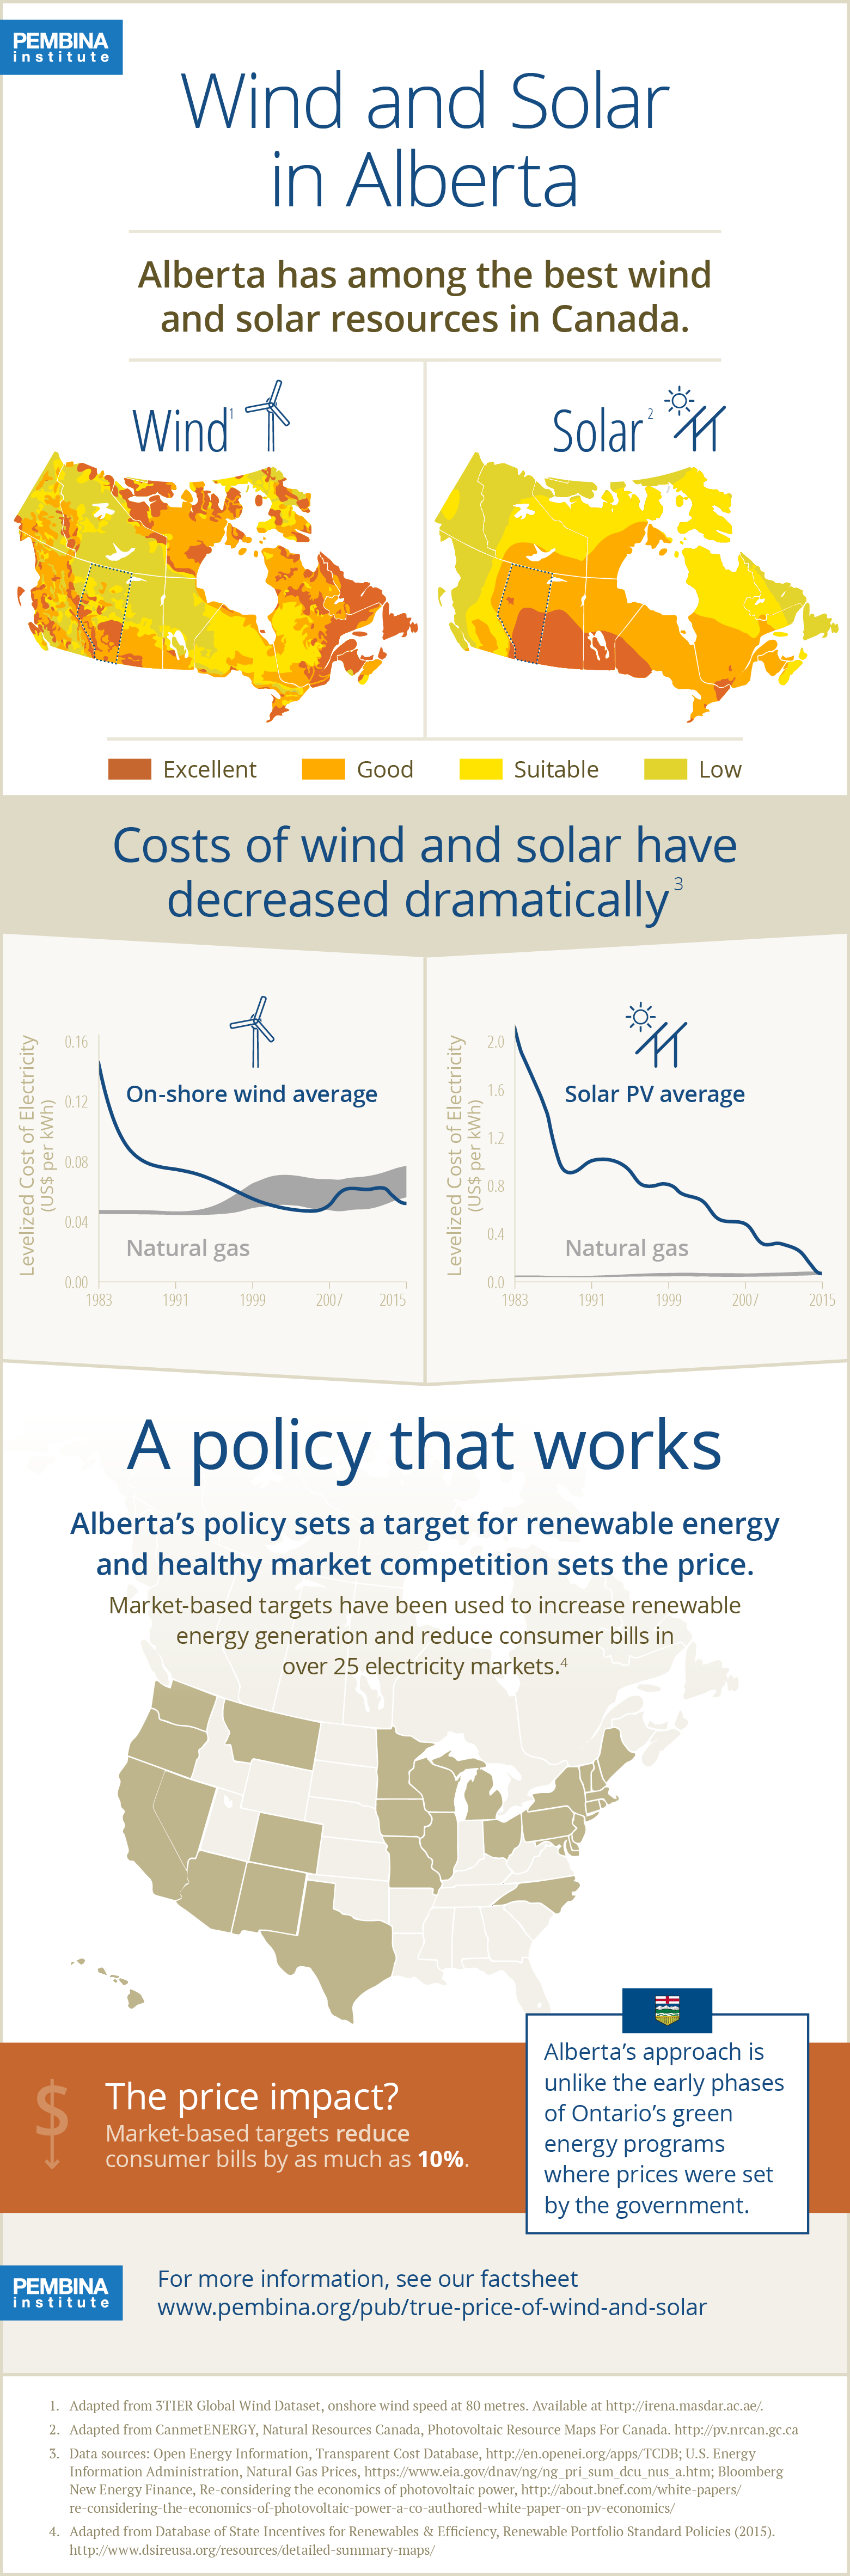 Wind and solar in Alberta infographic